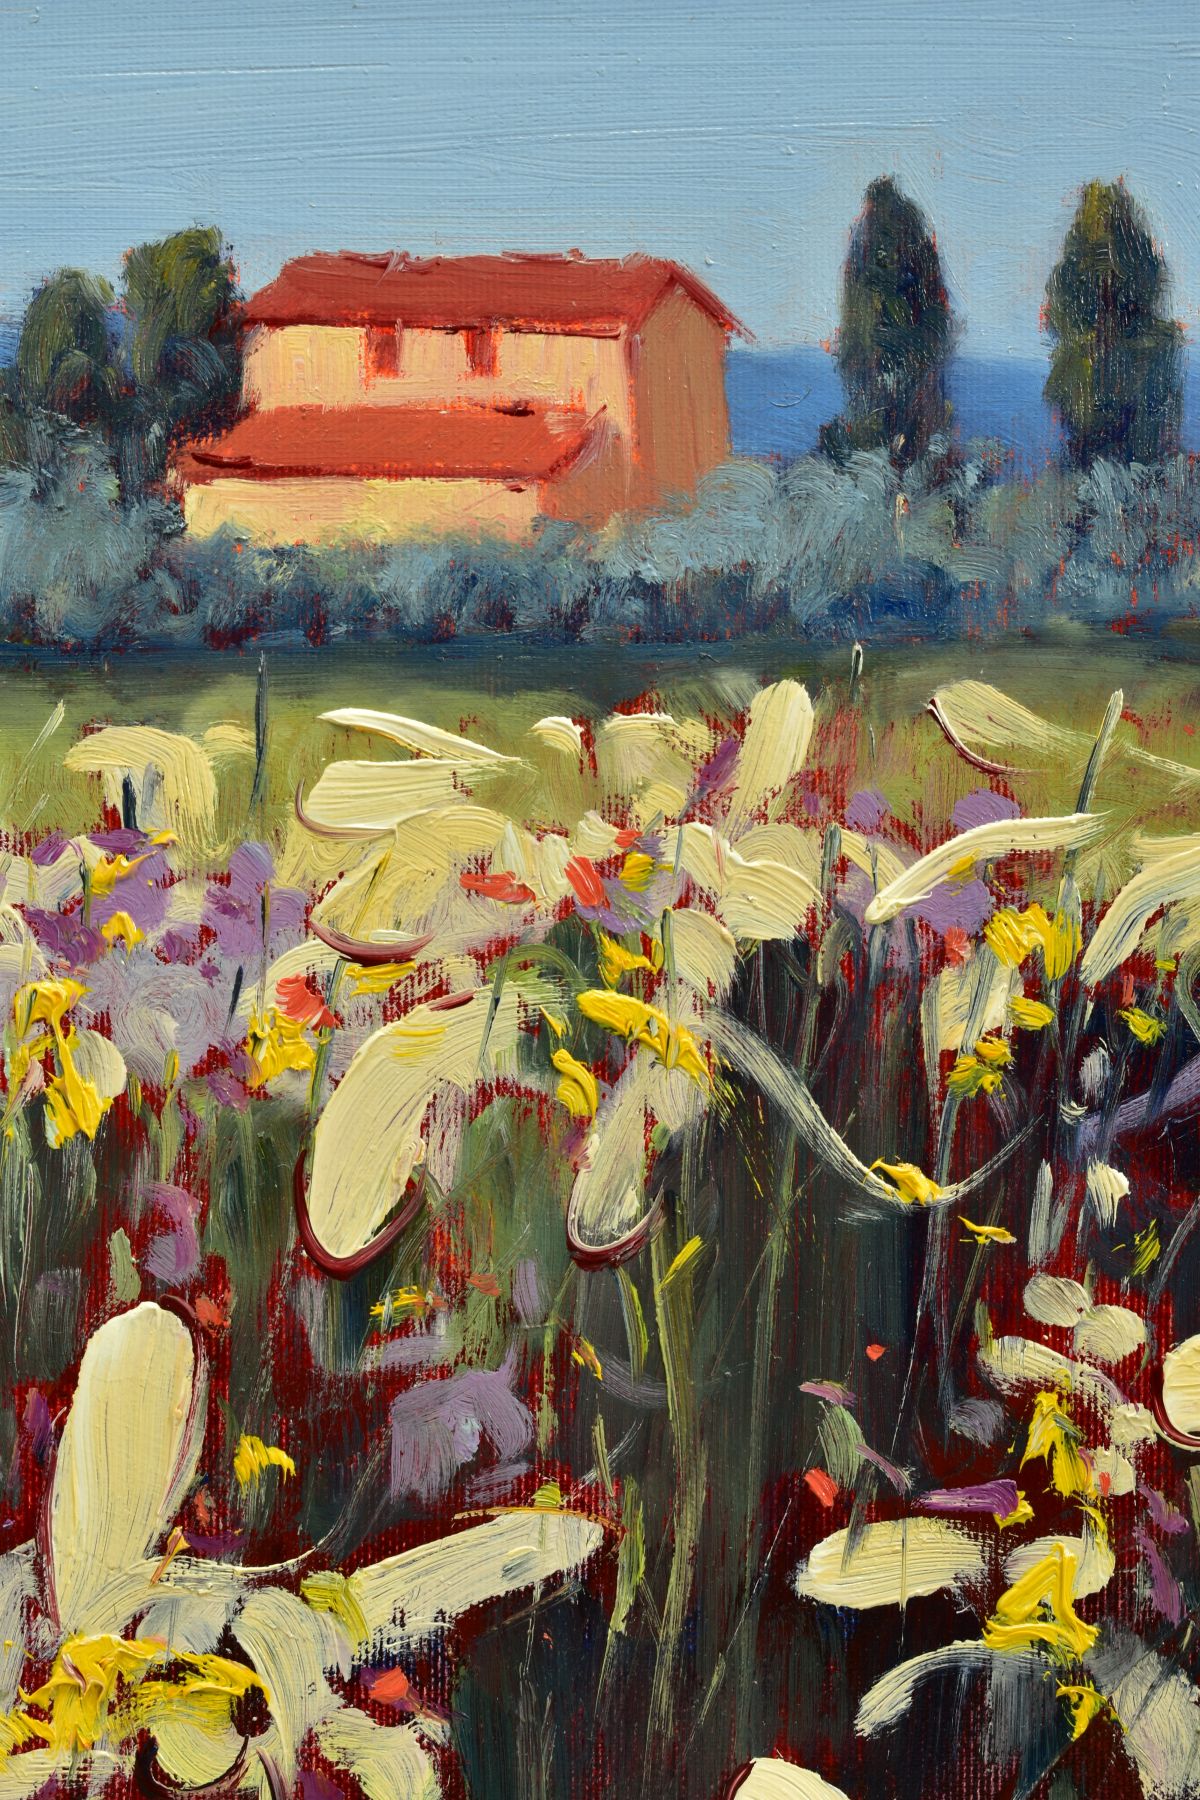 BRUNO TINUCCI (ITALY 19470) 'CAMPO BIANCO', an Italian landscape of flowers with buildings beyond, - Image 6 of 8